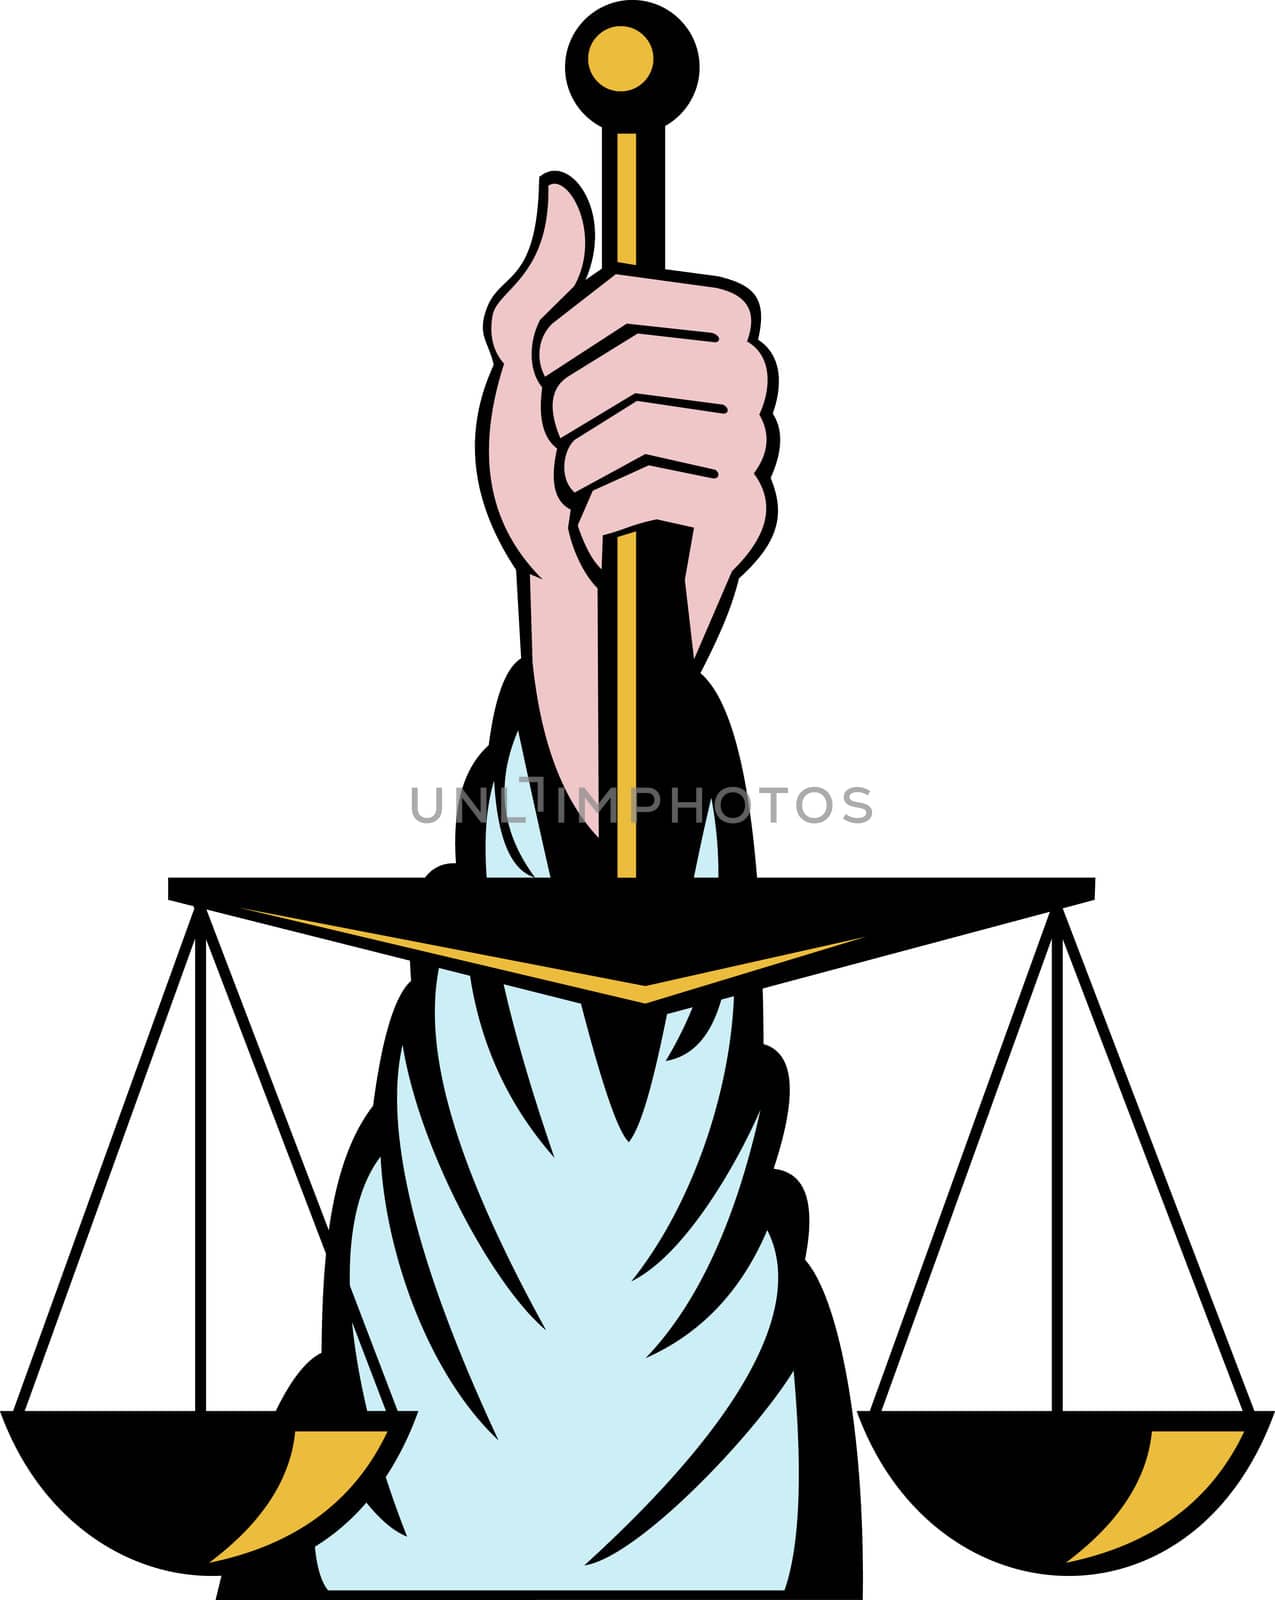 Hand holding scales of justice by patrimonio